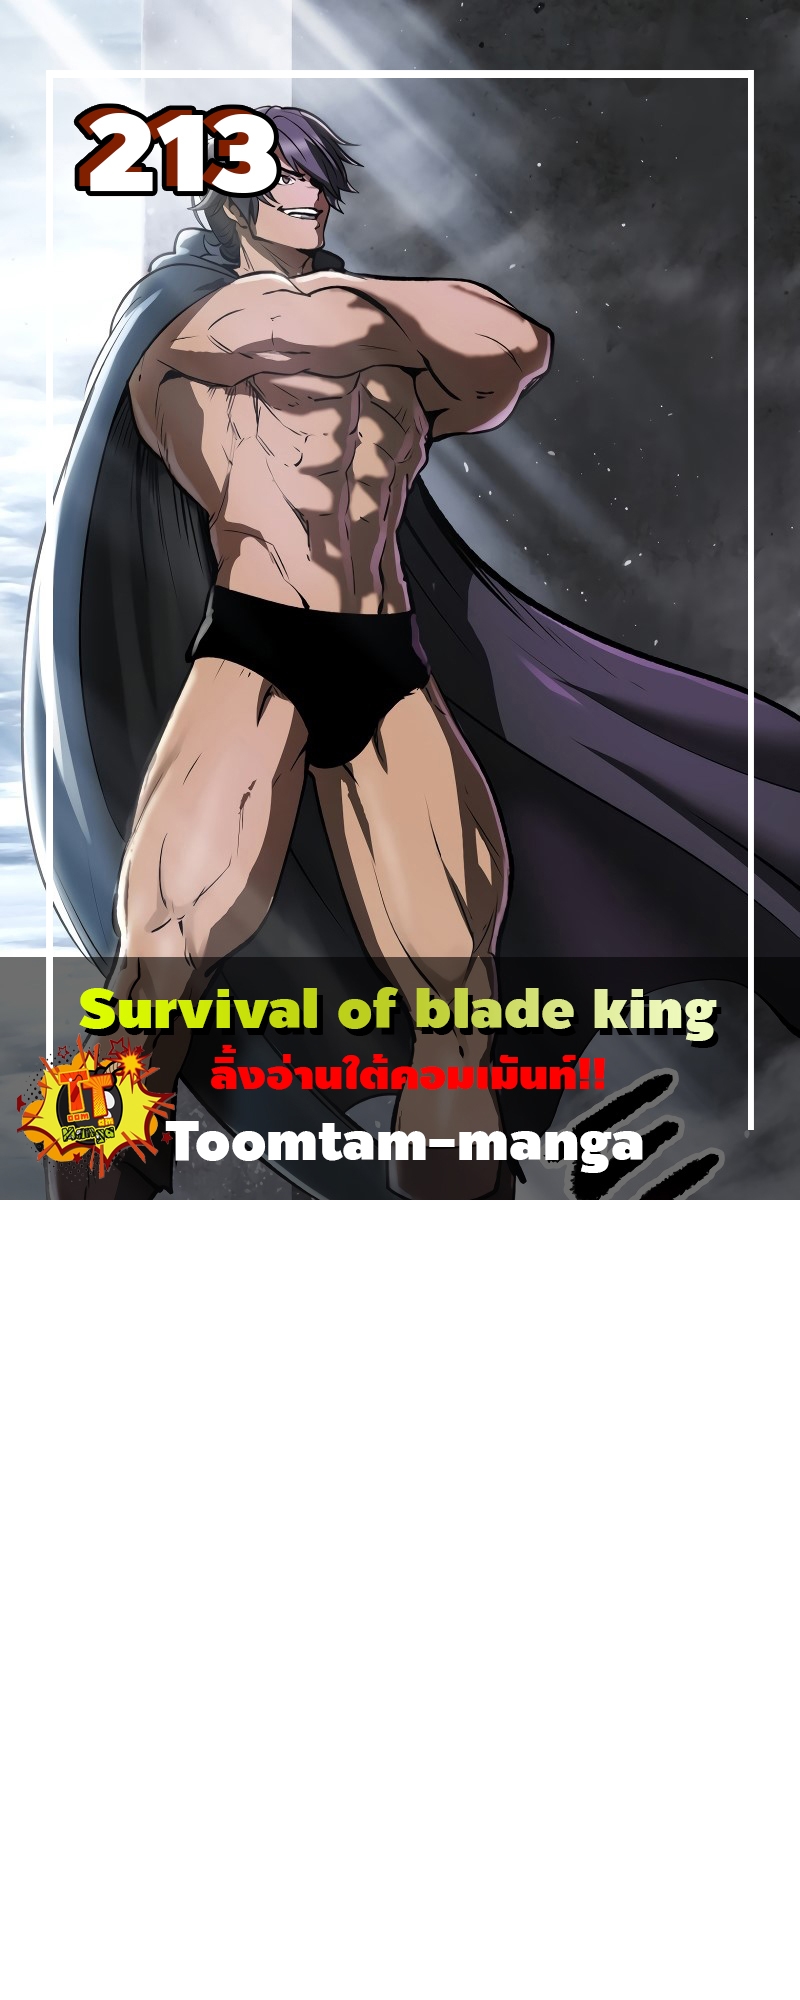 Survival of blade king 213 13 07 25670001